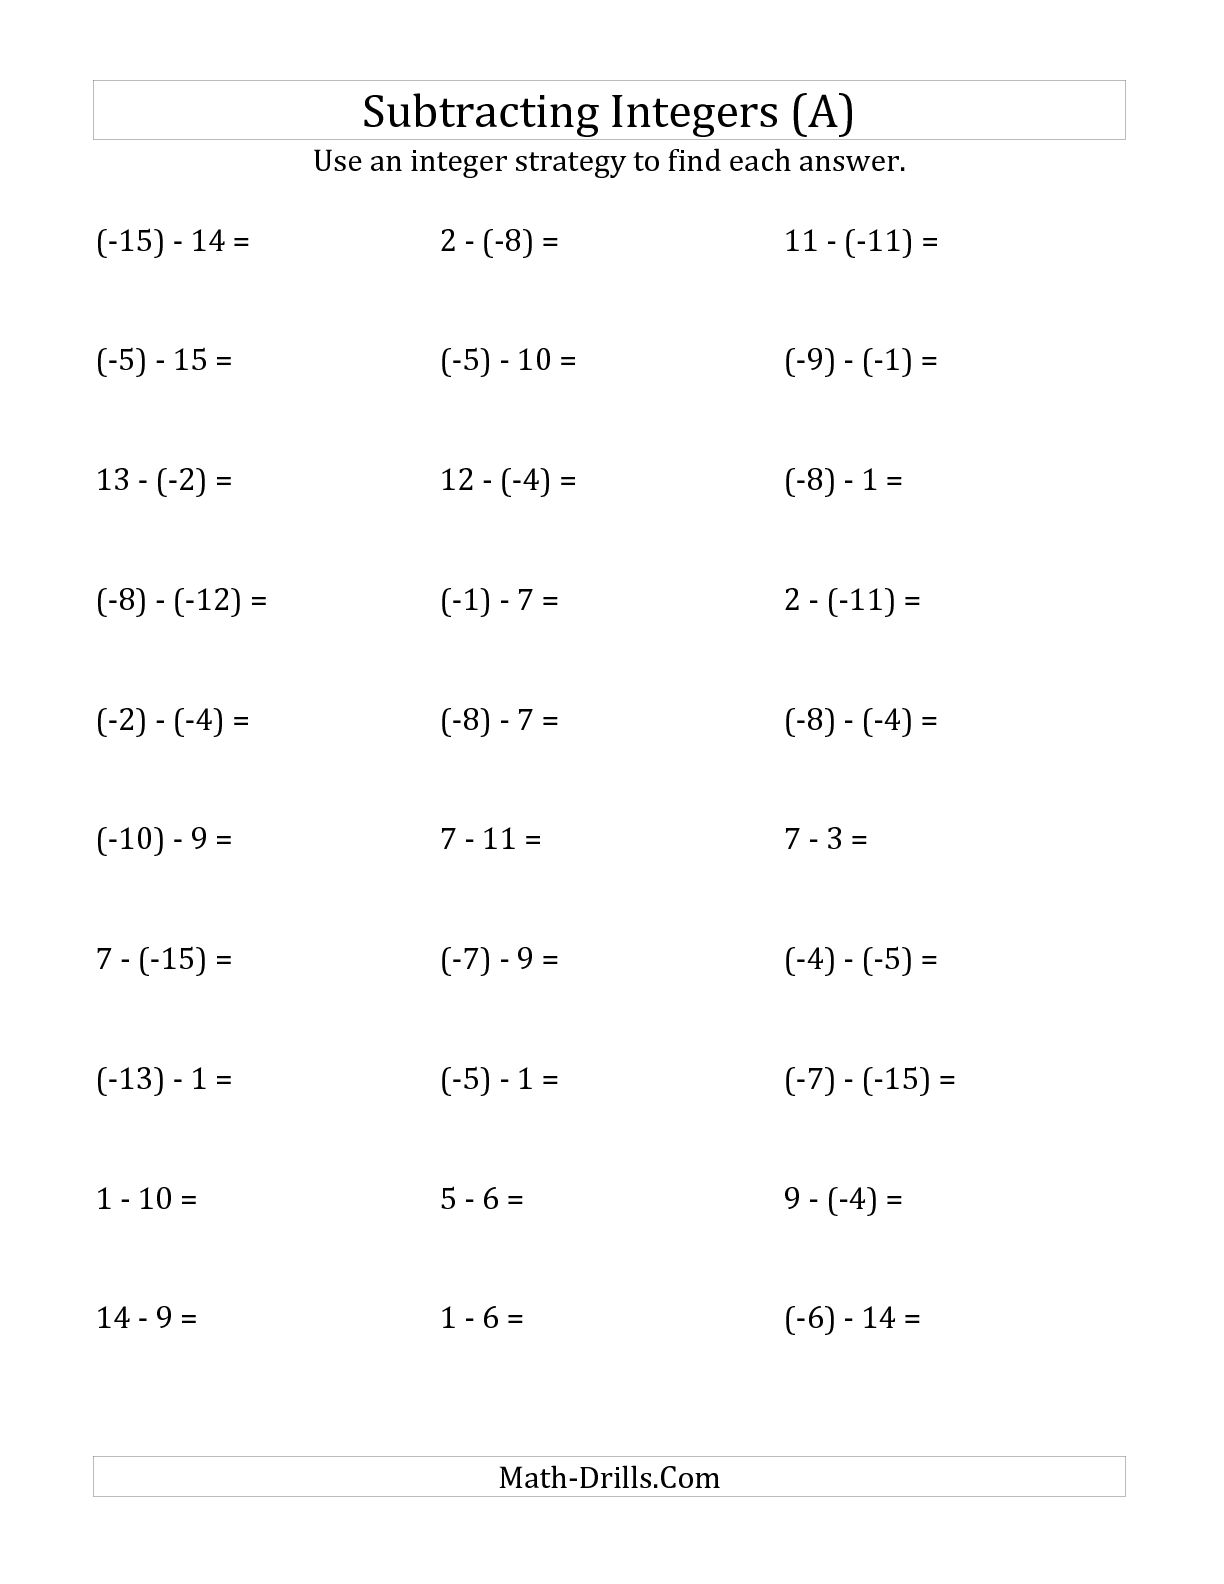 Subtracting Integers From 15 To Negative Numbers In Adding And